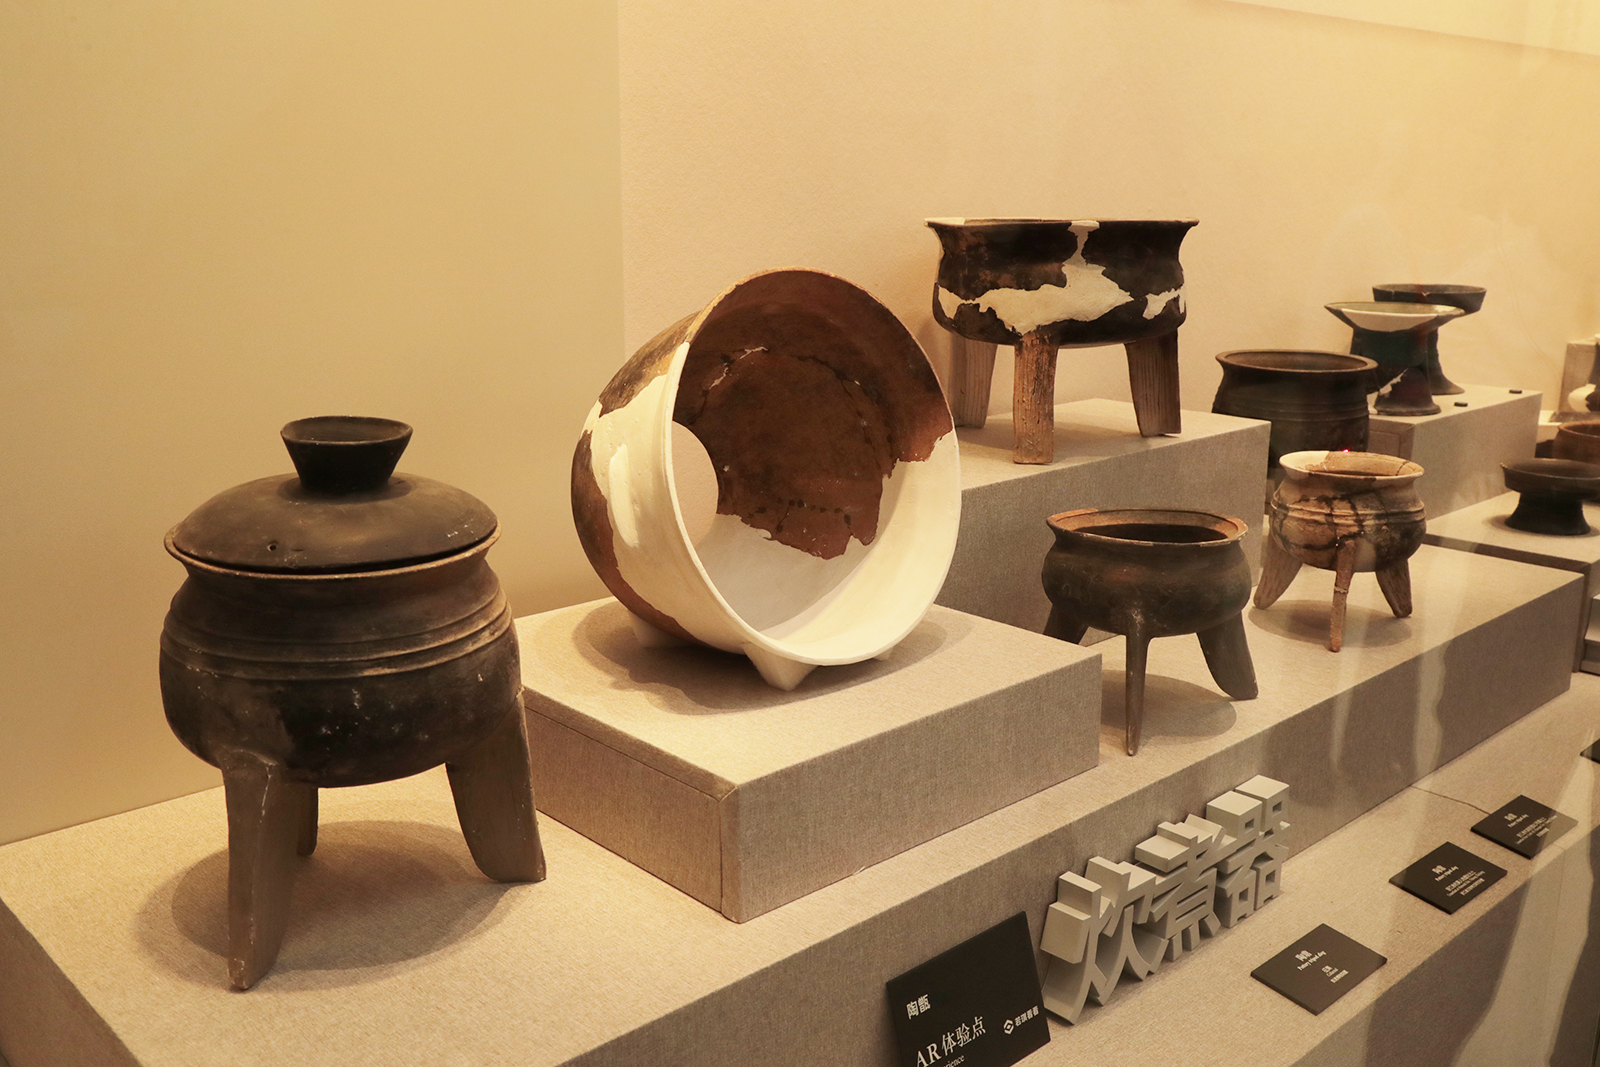 Pottery used for cooking during the time of Liangzhu Ancient City is on display at Liangzhu Museum in Hangzhou, Zhejiang Province. /CGTN